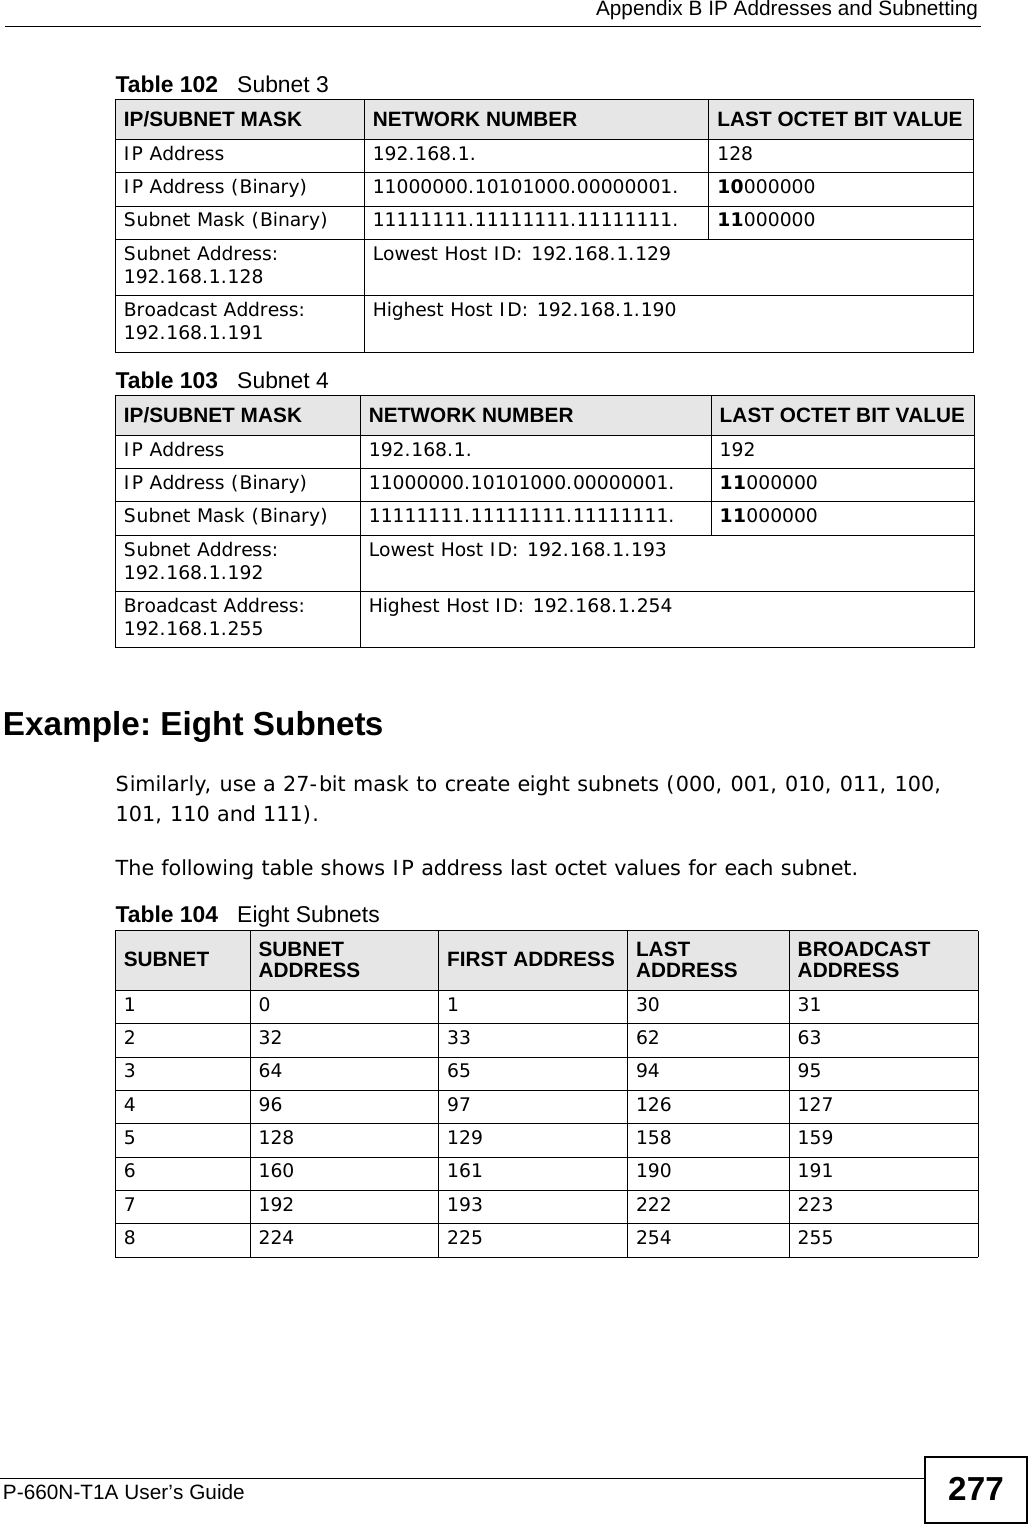  Appendix B IP Addresses and SubnettingP-660N-T1A User’s Guide 277Example: Eight SubnetsSimilarly, use a 27-bit mask to create eight subnets (000, 001, 010, 011, 100, 101, 110 and 111). The following table shows IP address last octet values for each subnet.Table 102   Subnet 3IP/SUBNET MASK NETWORK NUMBER LAST OCTET BIT VALUEIP Address 192.168.1. 128IP Address (Binary) 11000000.10101000.00000001. 10000000Subnet Mask (Binary) 11111111.11111111.11111111. 11000000Subnet Address: 192.168.1.128 Lowest Host ID: 192.168.1.129Broadcast Address: 192.168.1.191 Highest Host ID: 192.168.1.190Table 103   Subnet 4IP/SUBNET MASK NETWORK NUMBER LAST OCTET BIT VALUEIP Address 192.168.1. 192IP Address (Binary) 11000000.10101000.00000001. 11000000Subnet Mask (Binary) 11111111.11111111.11111111. 11000000Subnet Address: 192.168.1.192 Lowest Host ID: 192.168.1.193Broadcast Address: 192.168.1.255 Highest Host ID: 192.168.1.254Table 104   Eight SubnetsSUBNET SUBNET ADDRESS FIRST ADDRESS LAST ADDRESS BROADCAST ADDRESS1 0 1 30 31232 33 62 63364 65 94 95496 97 126 1275128 129 158 1596160 161 190 1917192 193 222 2238224 225 254 255